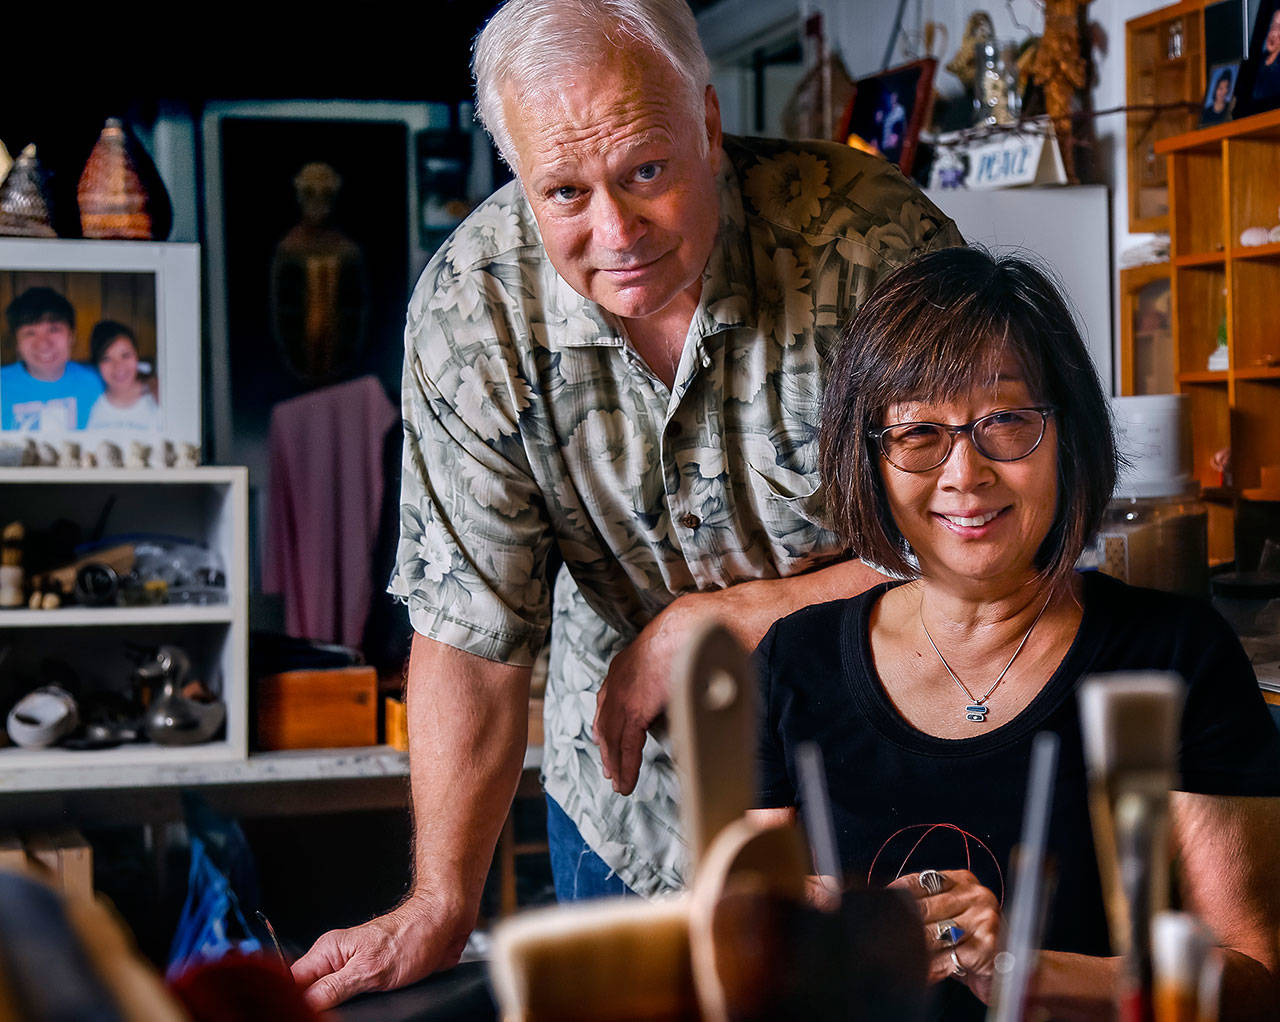 Artists Chris and Jan Hopkins each have their own studios in their Everett home. The renowned couple were named the Schack Art Center’s 2018 Artists of the Year. (Dan Bates / The Herald)